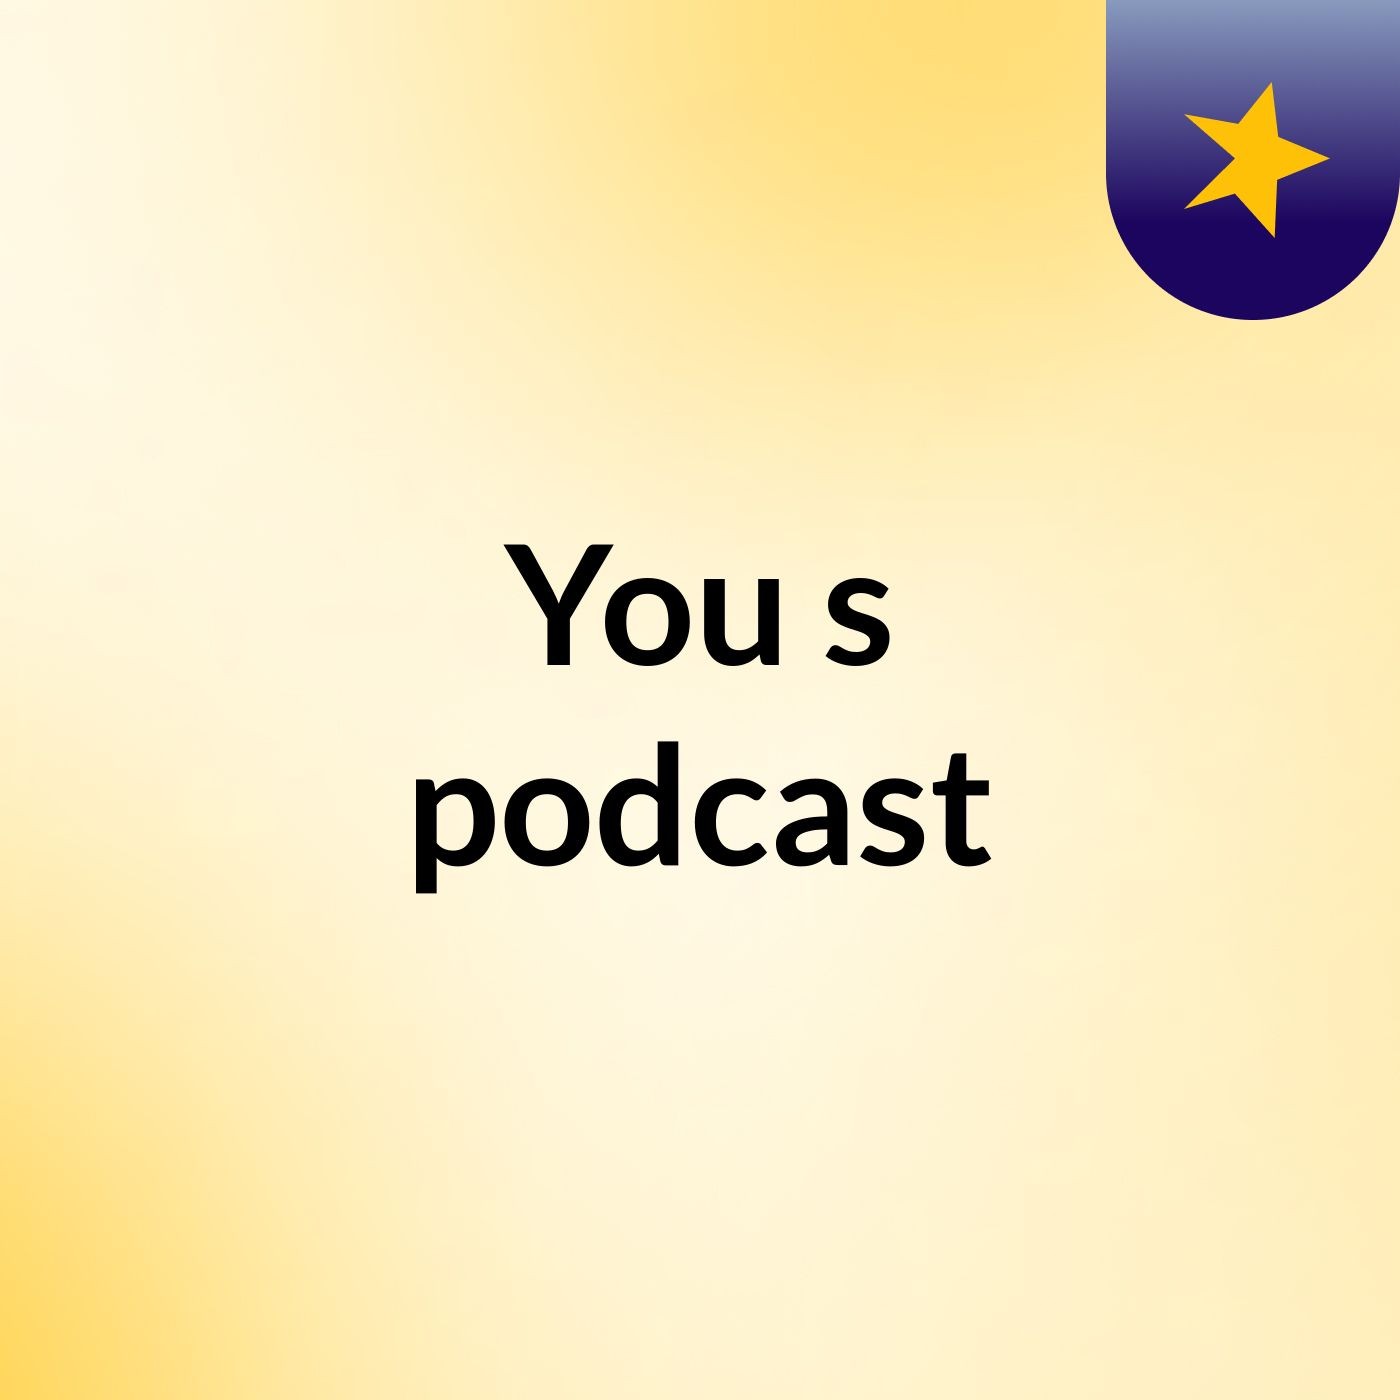 You's podcast